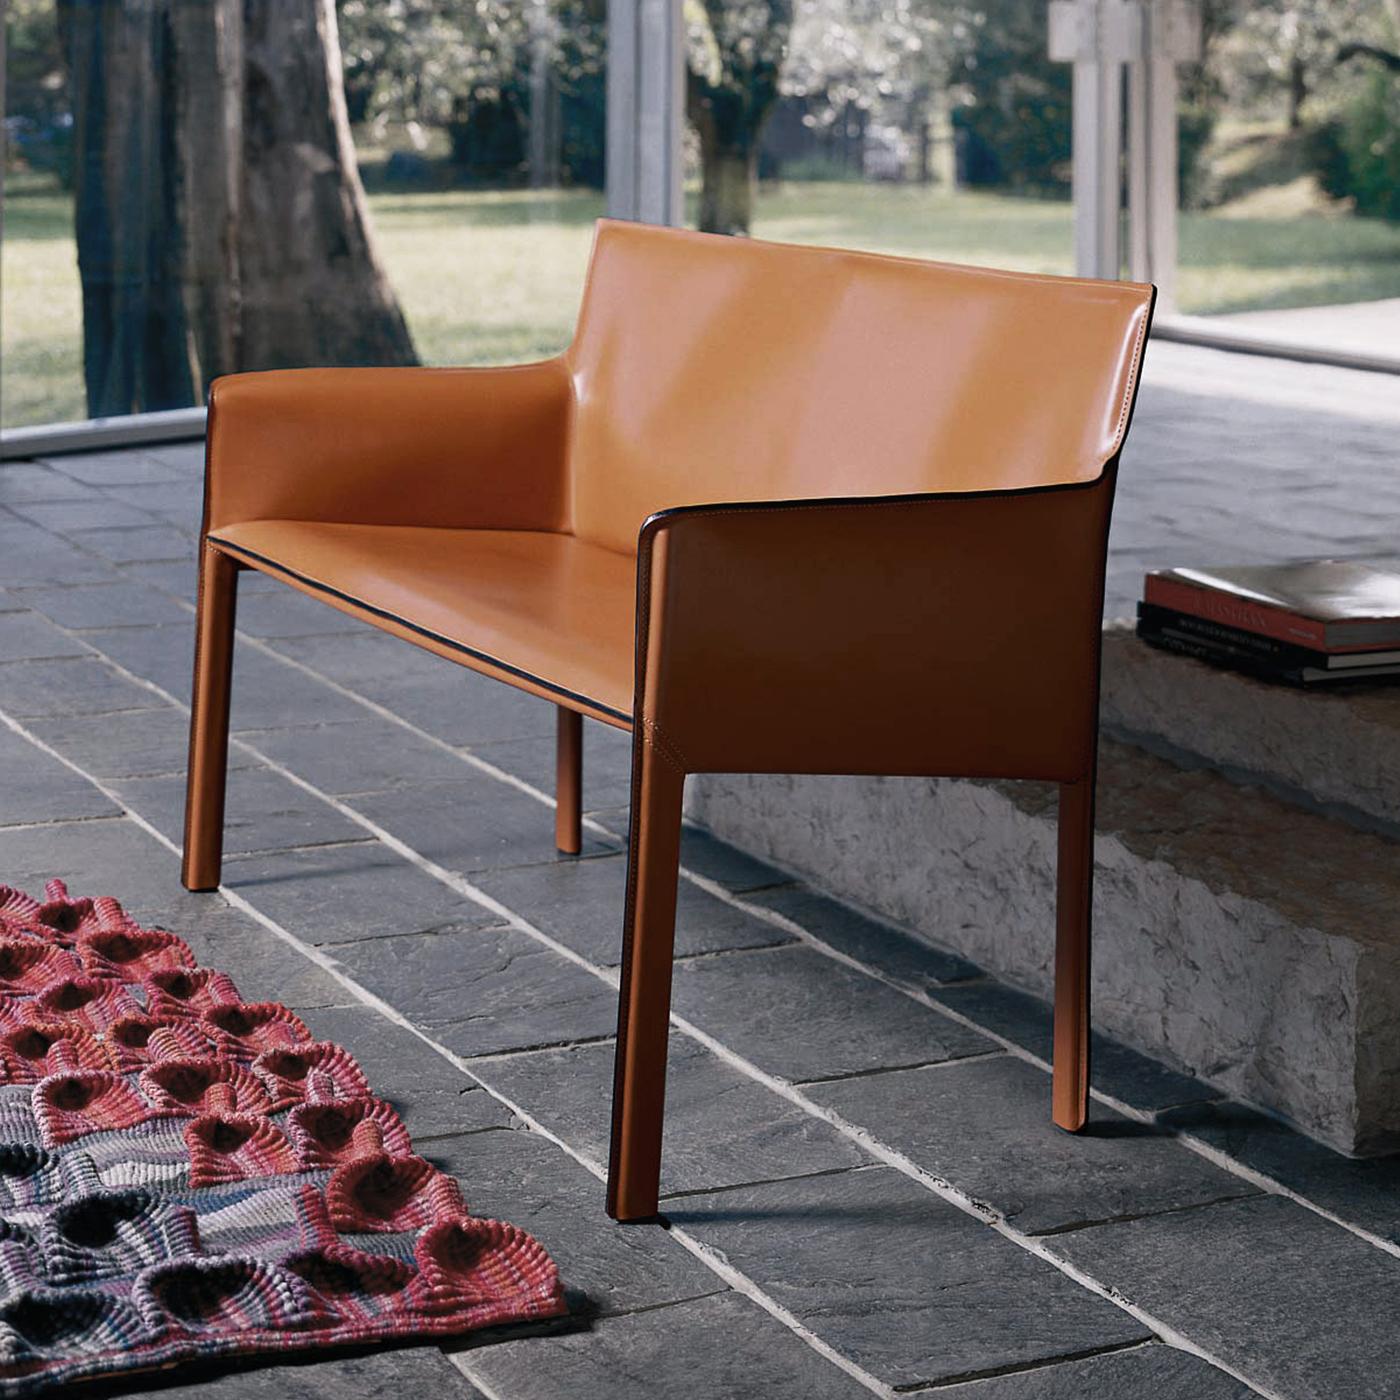 This sofa is completely covered in natural-colored leather. Its thin, minimal structure creates a distinct, striking visual silhouette. Formed from a tubular steel frame, it can be completely customized in terms of color and finishings, making it